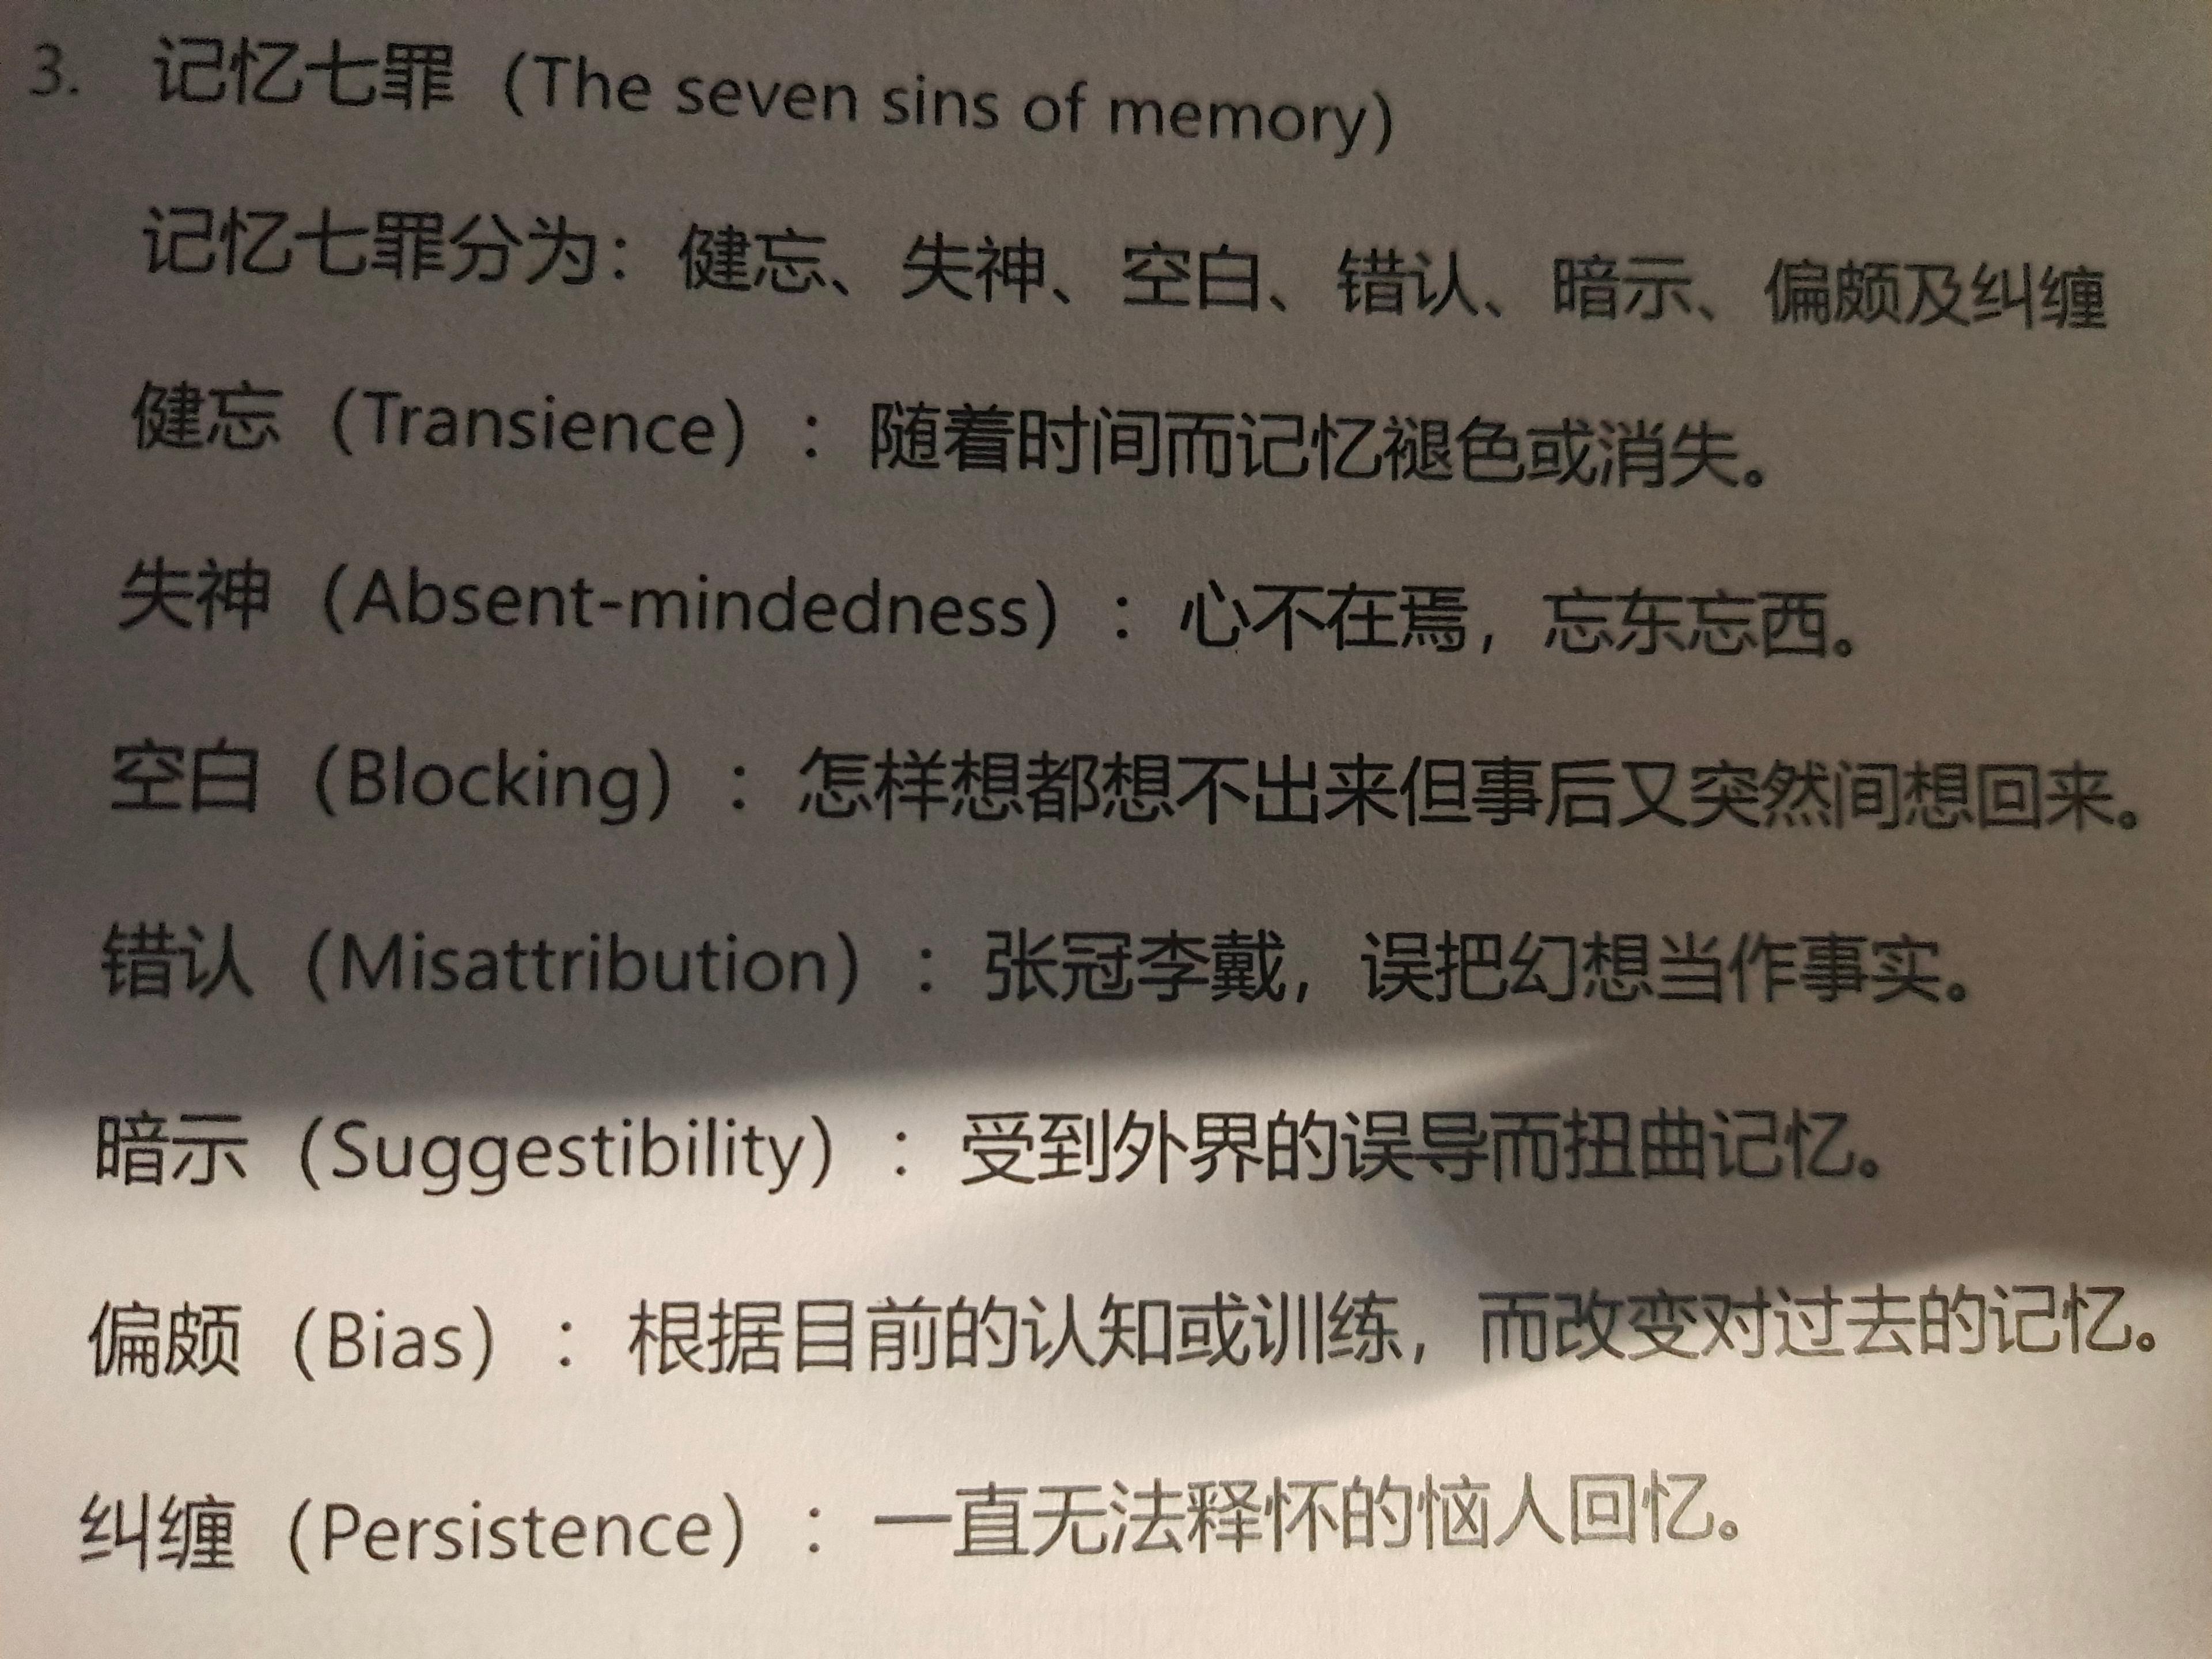 The Seven Sins of Memory